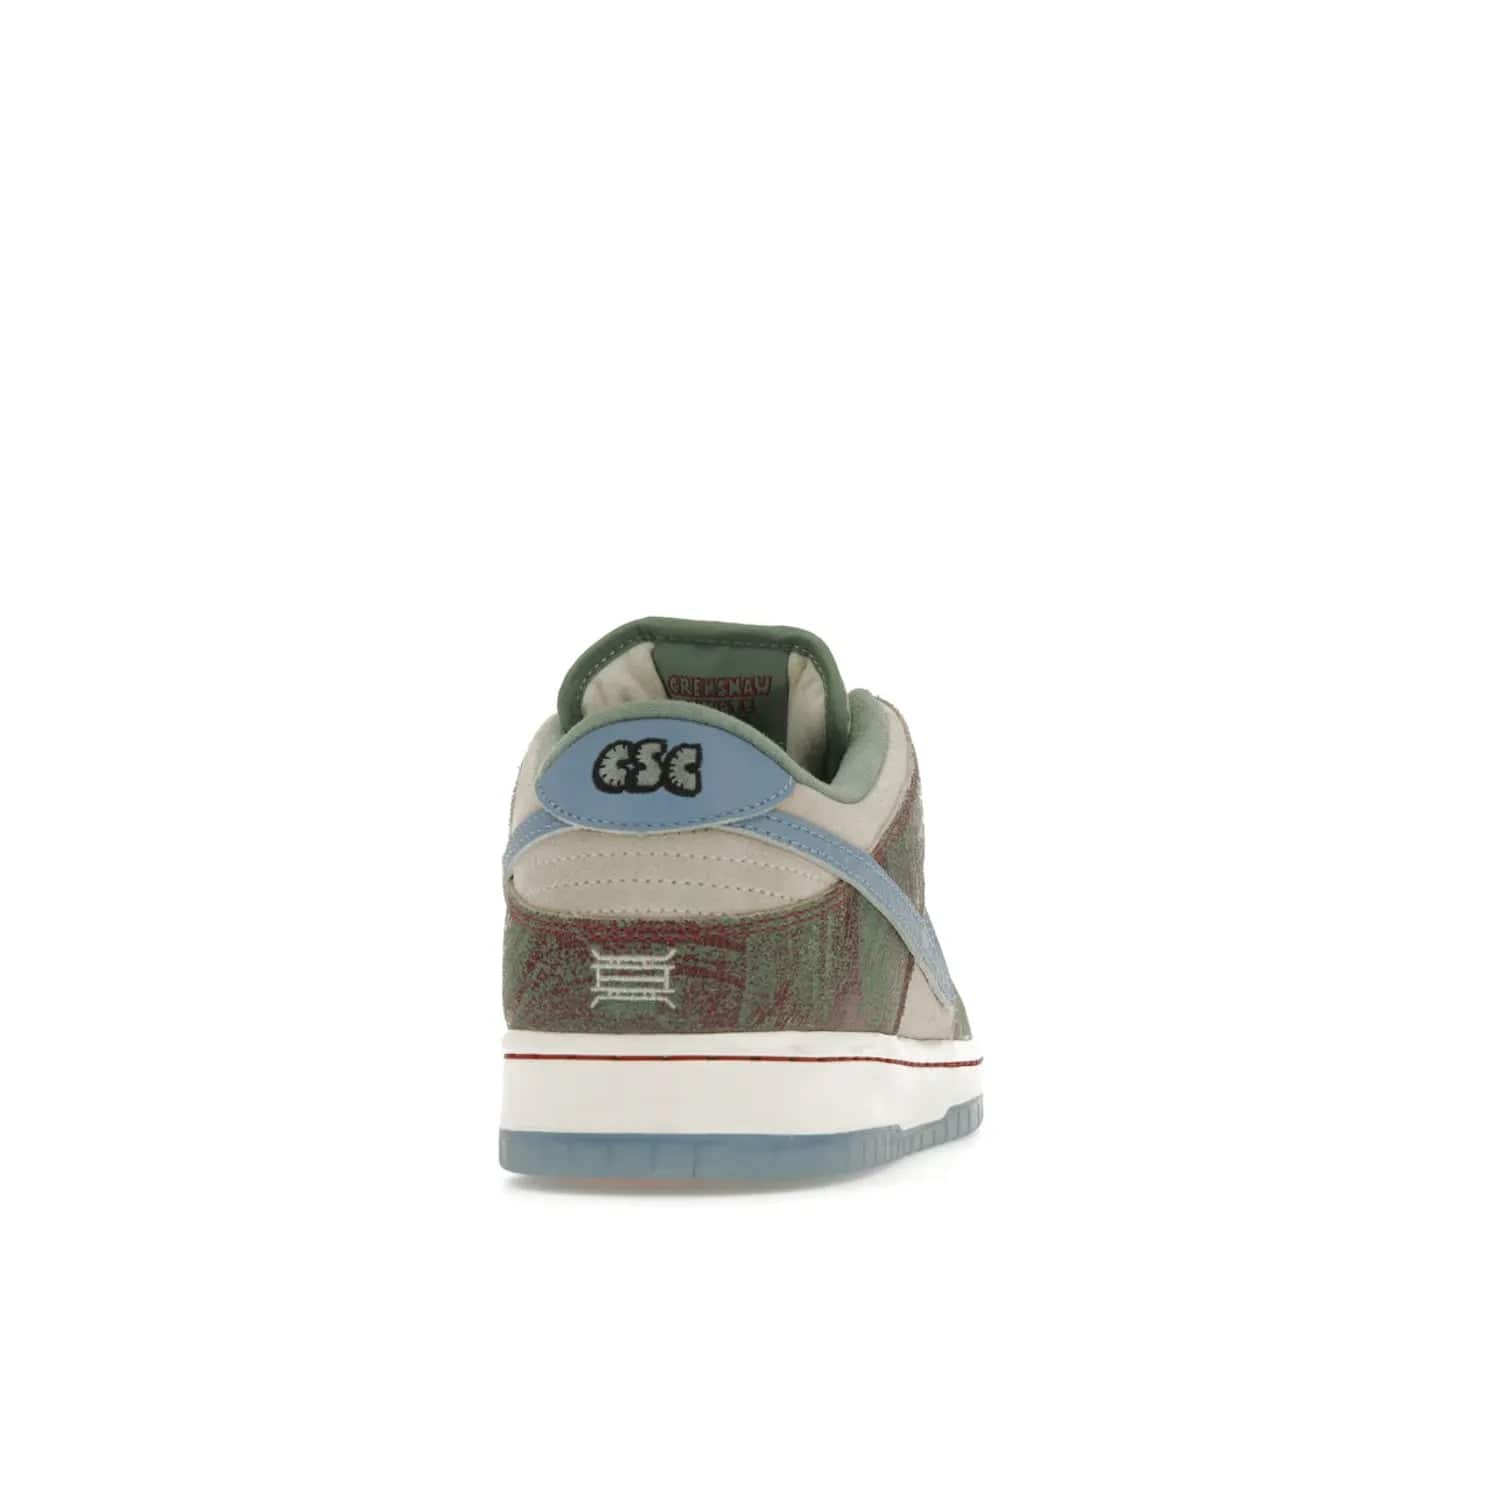 Nike SB Dunk Low Crenshaw Skate Club - Image 29 - Only at www.BallersClubKickz.com - Introducing the Nike SB Dunk Low Crenshaw Skate Club! Classic skate shoes with Sail and Light Blue upper, Cedar accents, padded collars and superior grip for comfortable, stable performance and style. Ideal for any skate session.